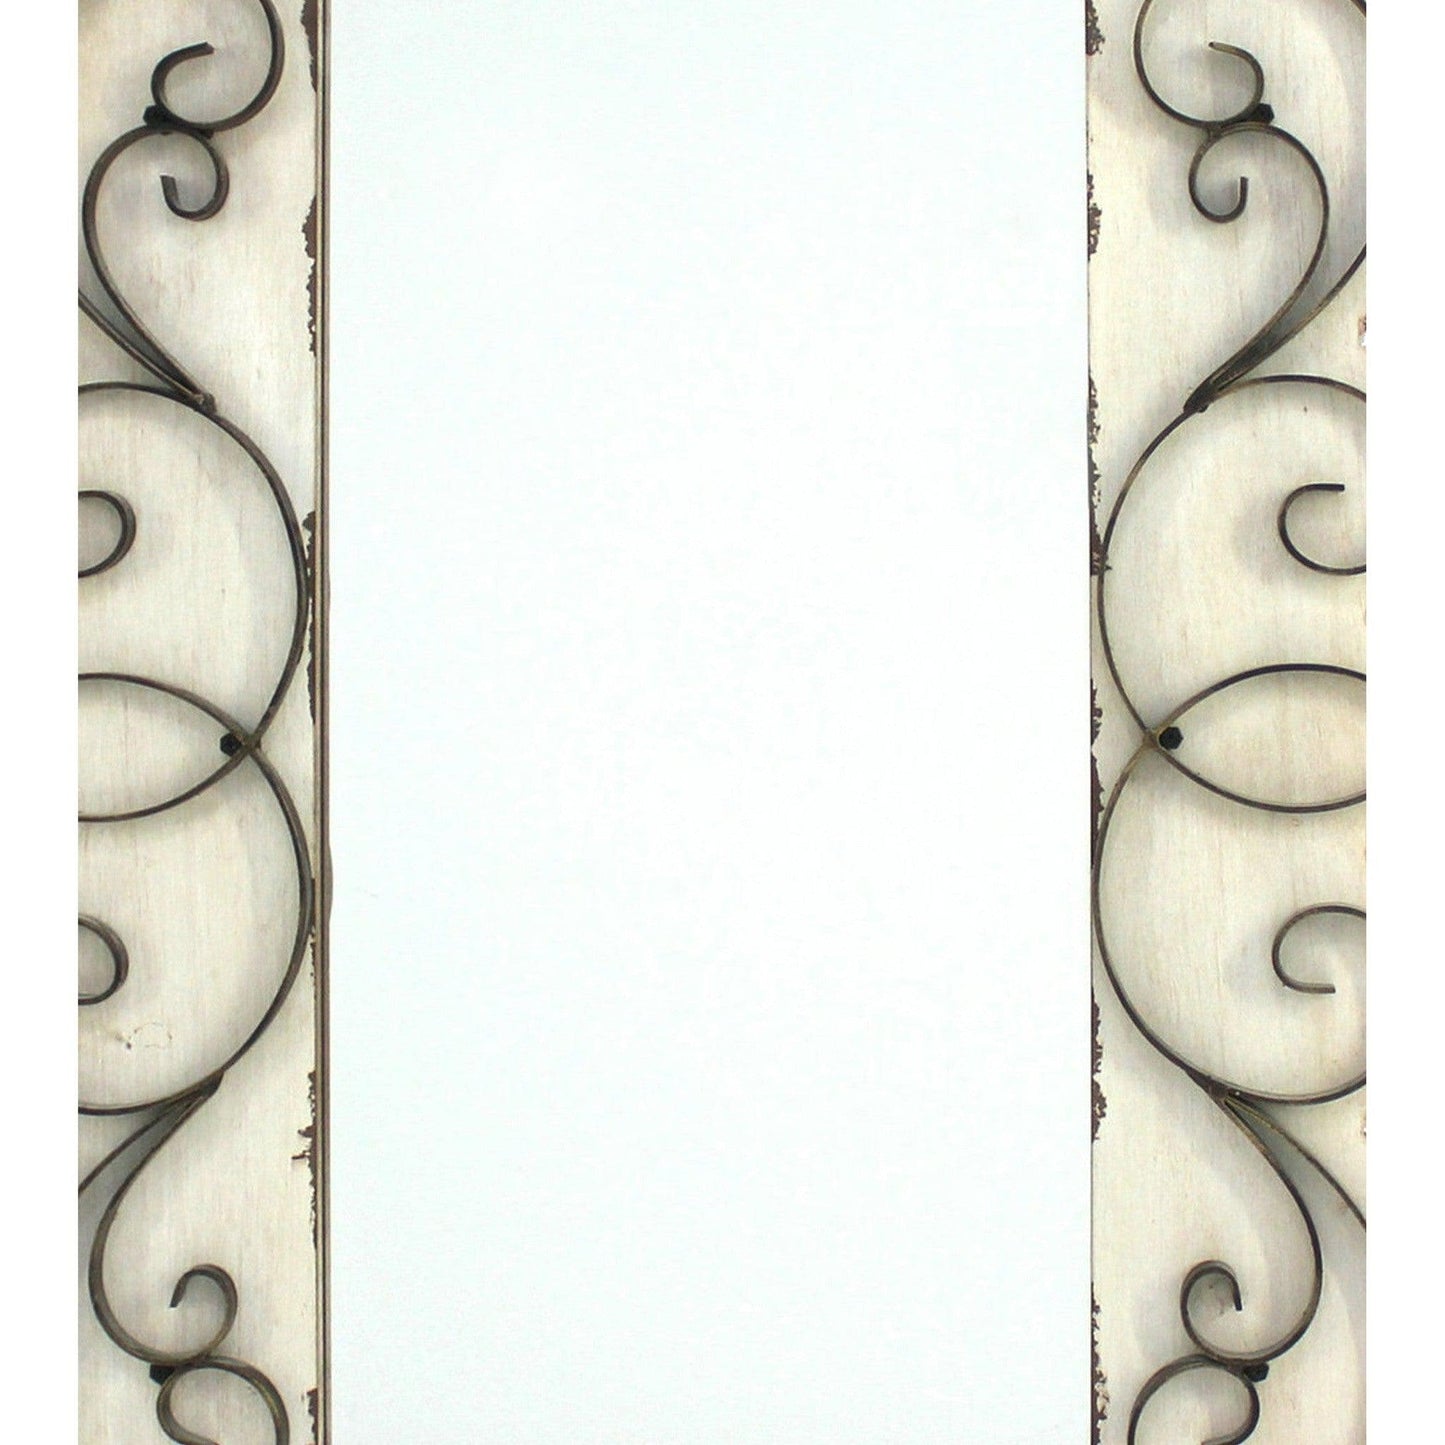 Benzara White Rectangular Wall Mirror With Wooden Frame and Metal Scrolled Edges